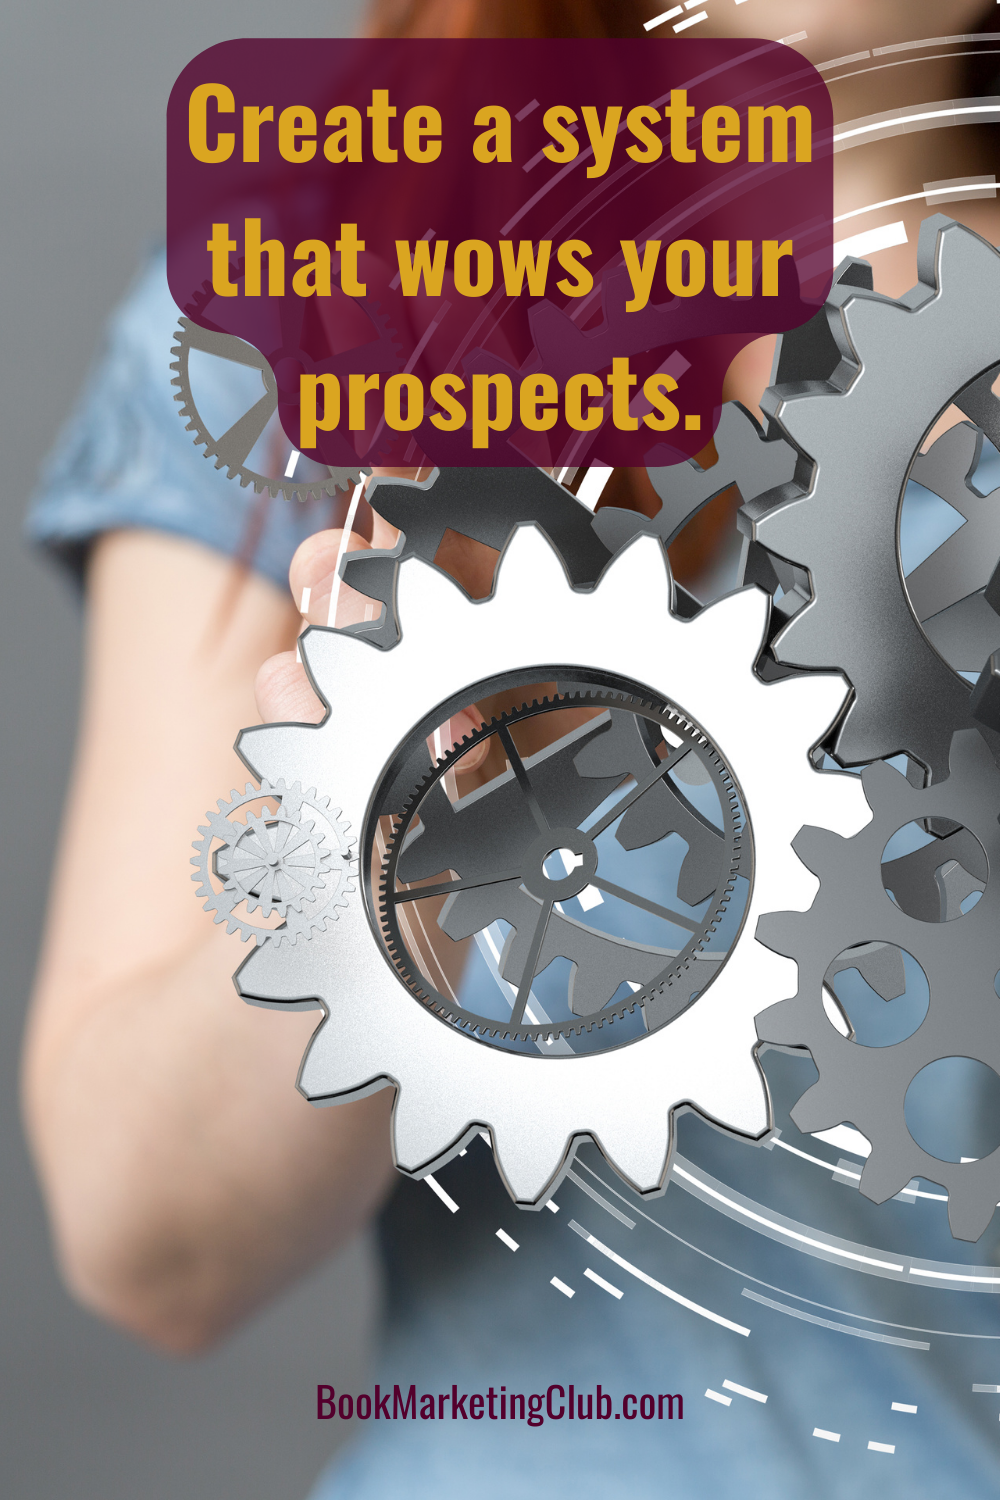 Create a system that wows your prospects